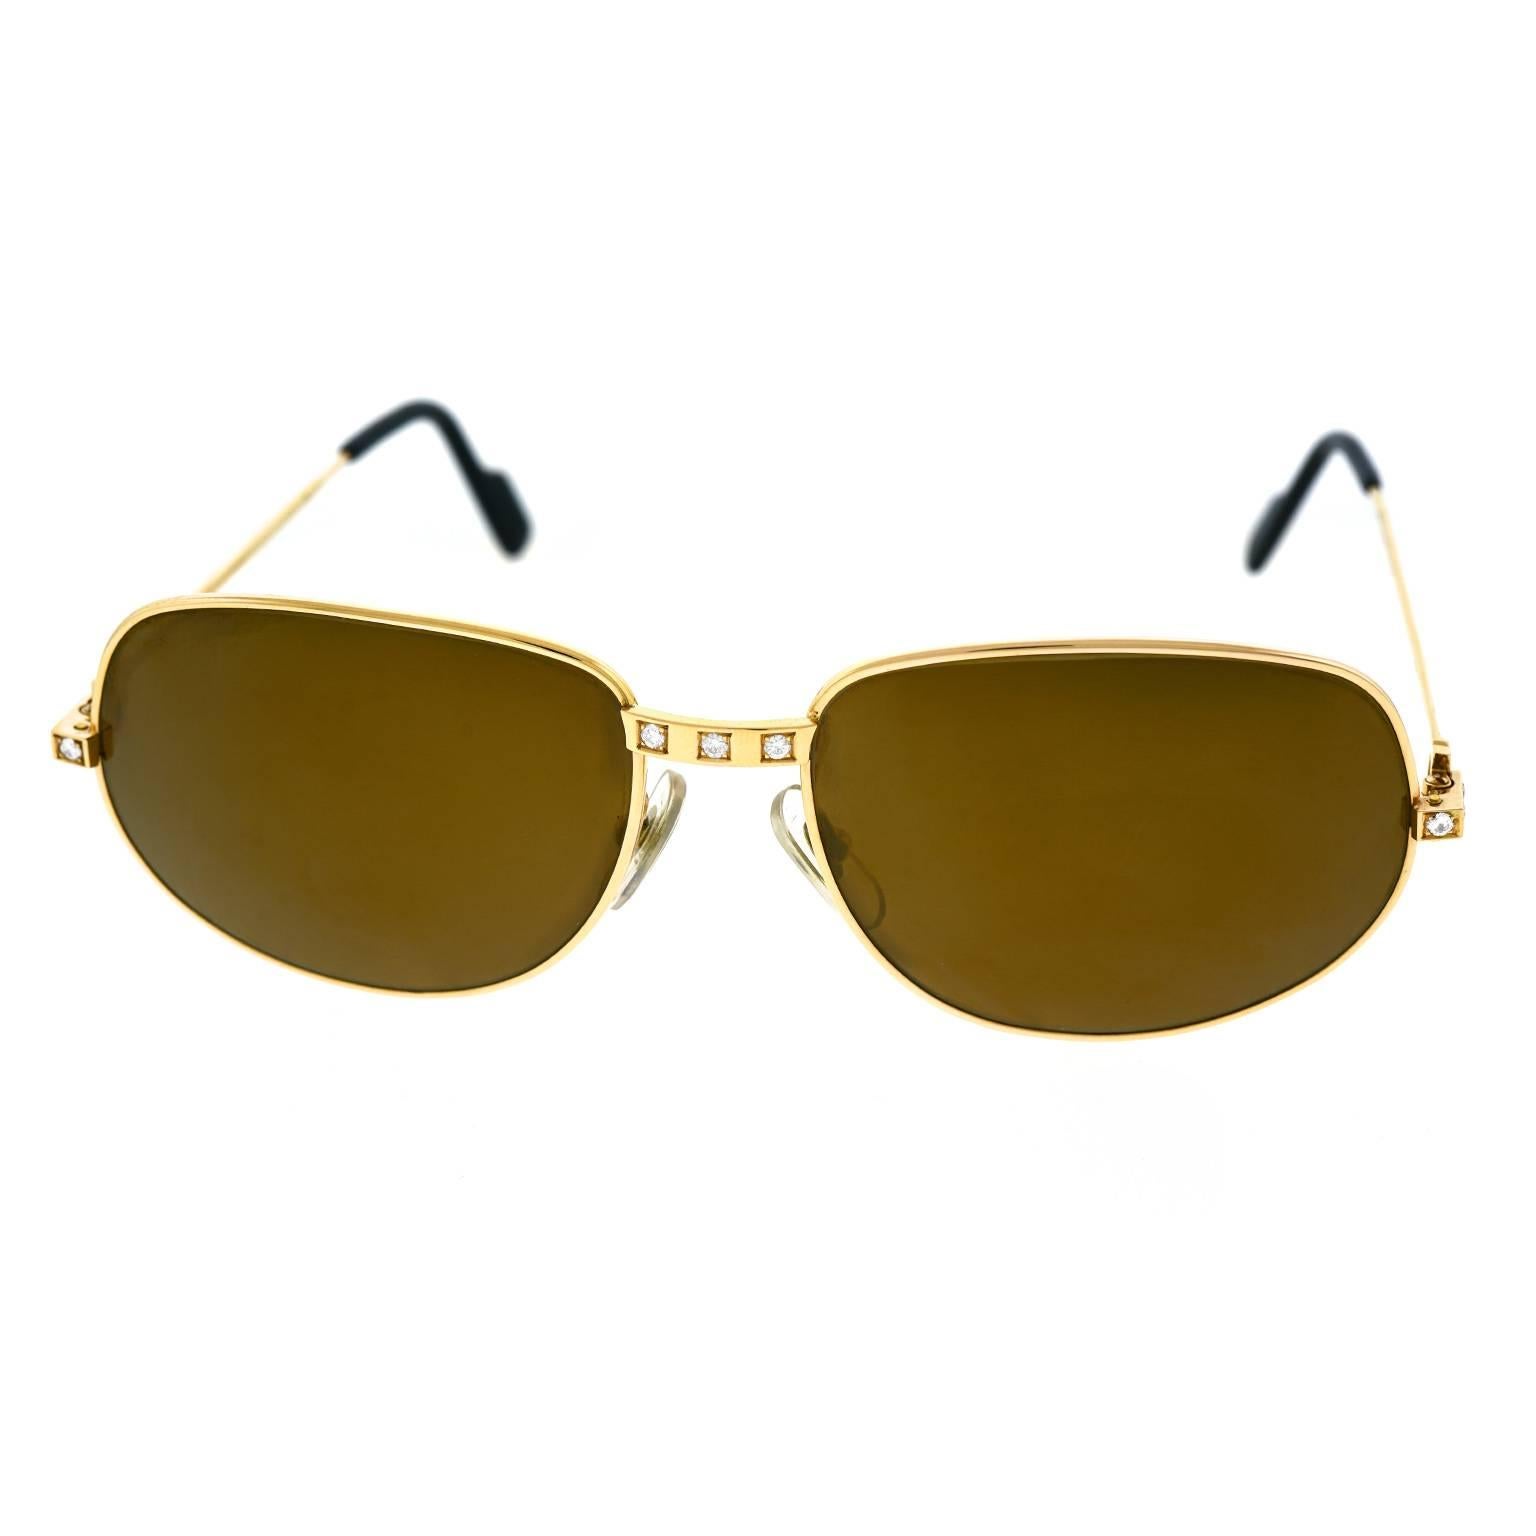 Circa 2000s, 18k, Cartier, France.  Part of the Santos style set, this sumptuous pair of diamond-set 18k gold sunglasses from Cartier are radiantly chic. The renowned jeweler and iconic luxury brand offers narrative life possibilities defined by the